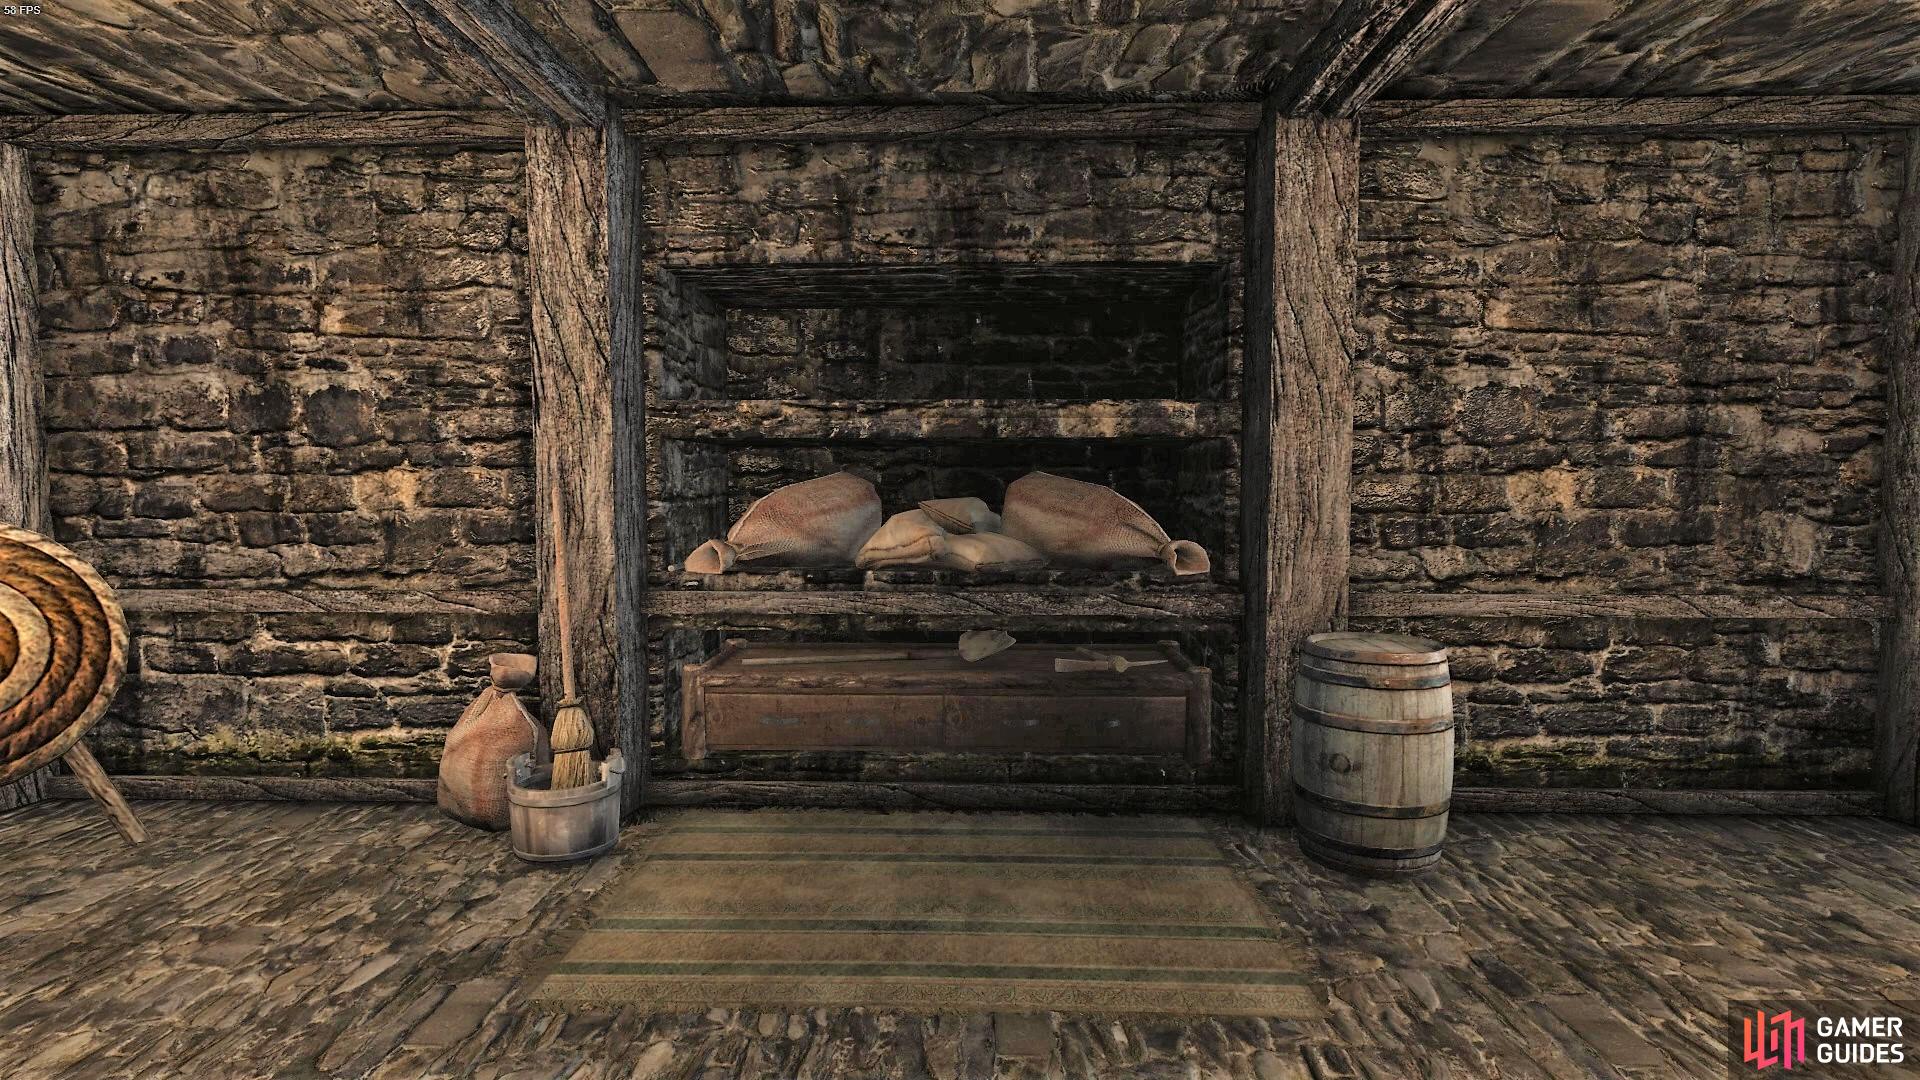 The cellar can hold lots of storage bags as well as serve as a blacksmith station, armory, and place of worship.